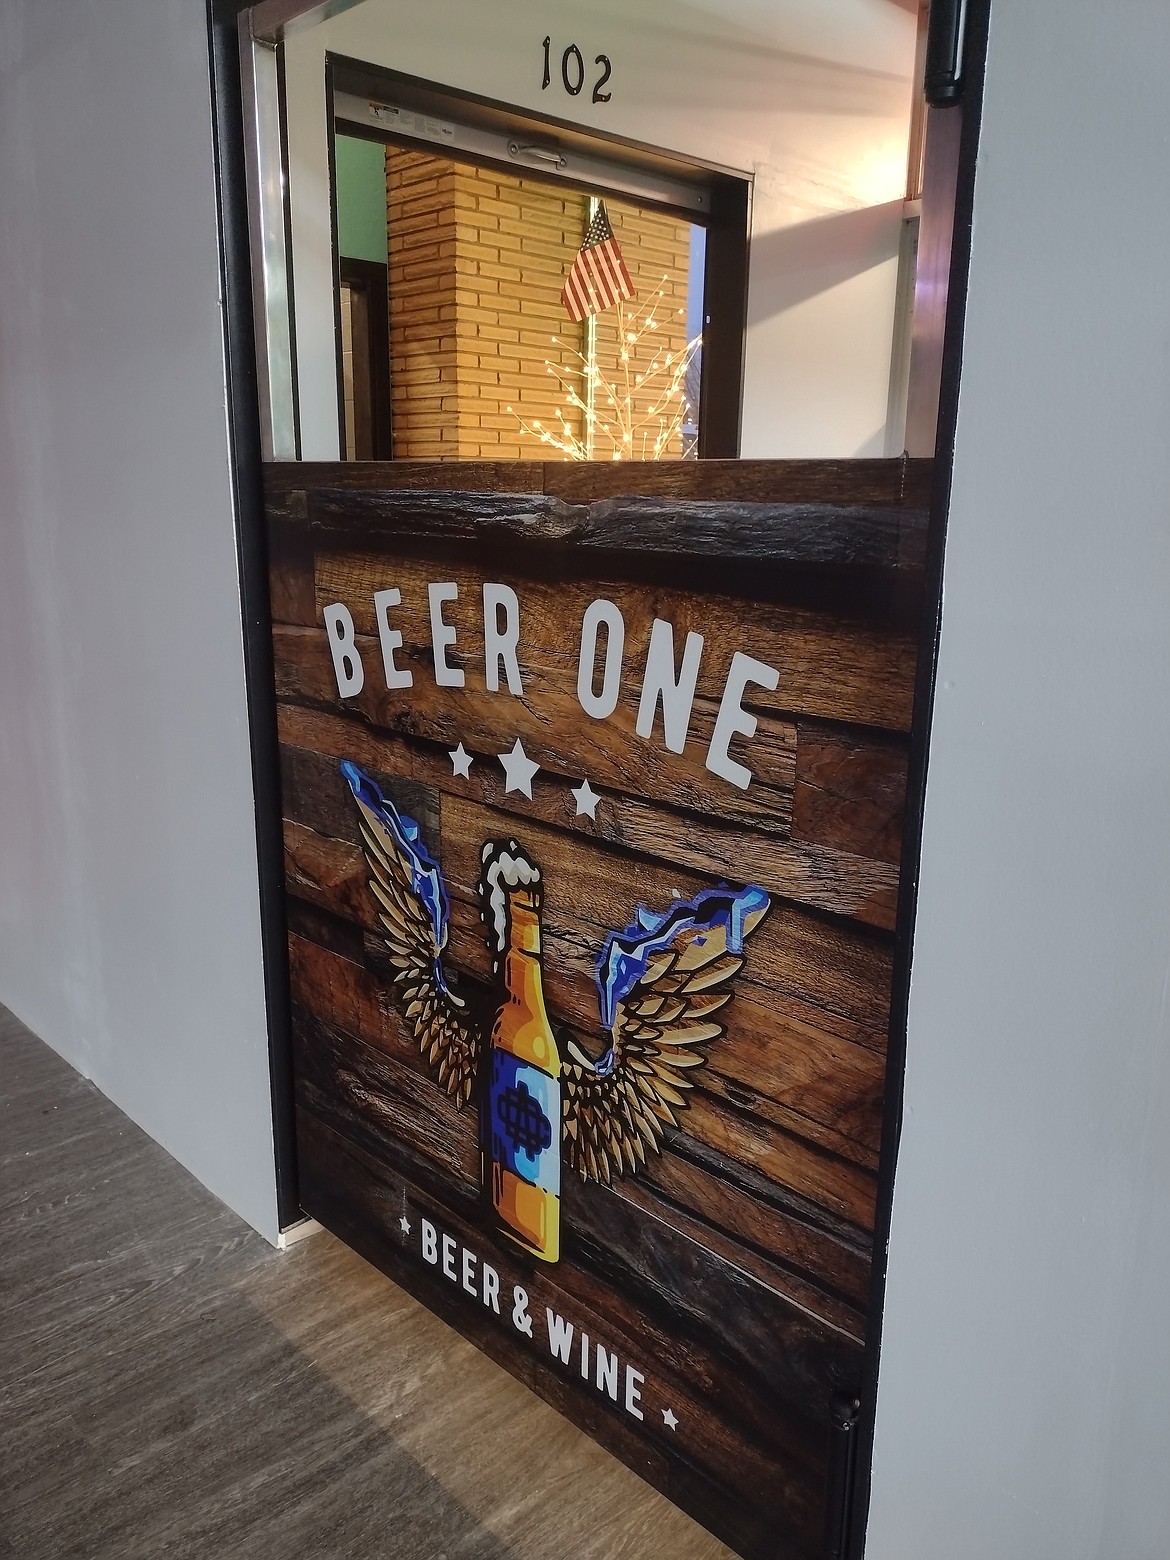 Beer One is open on Fourth Street in Coeur d'Alene.